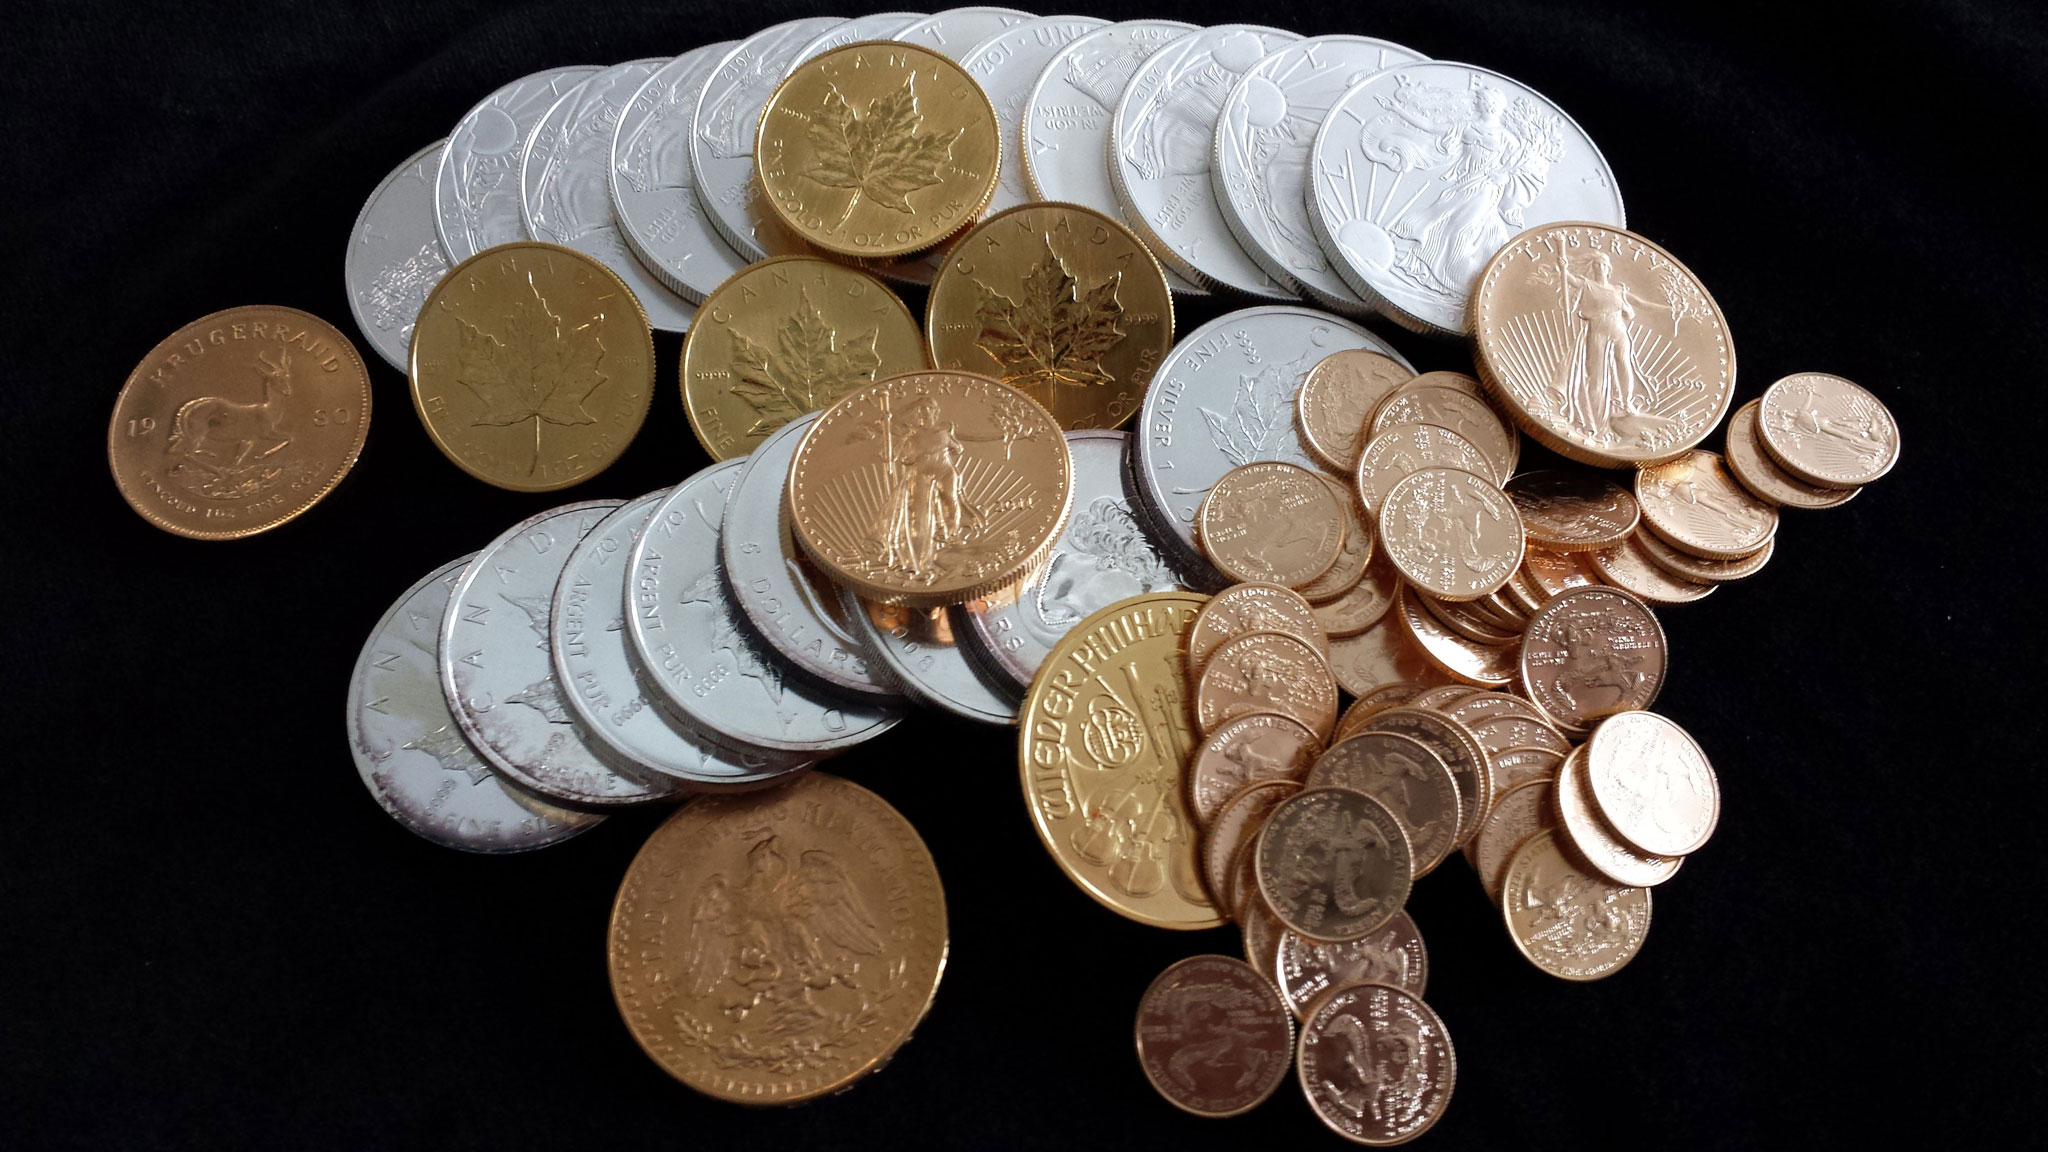 Golden Valley Stamps and Coins - Specializing in Stamp, Coin, and Currency  Collecting Supplies